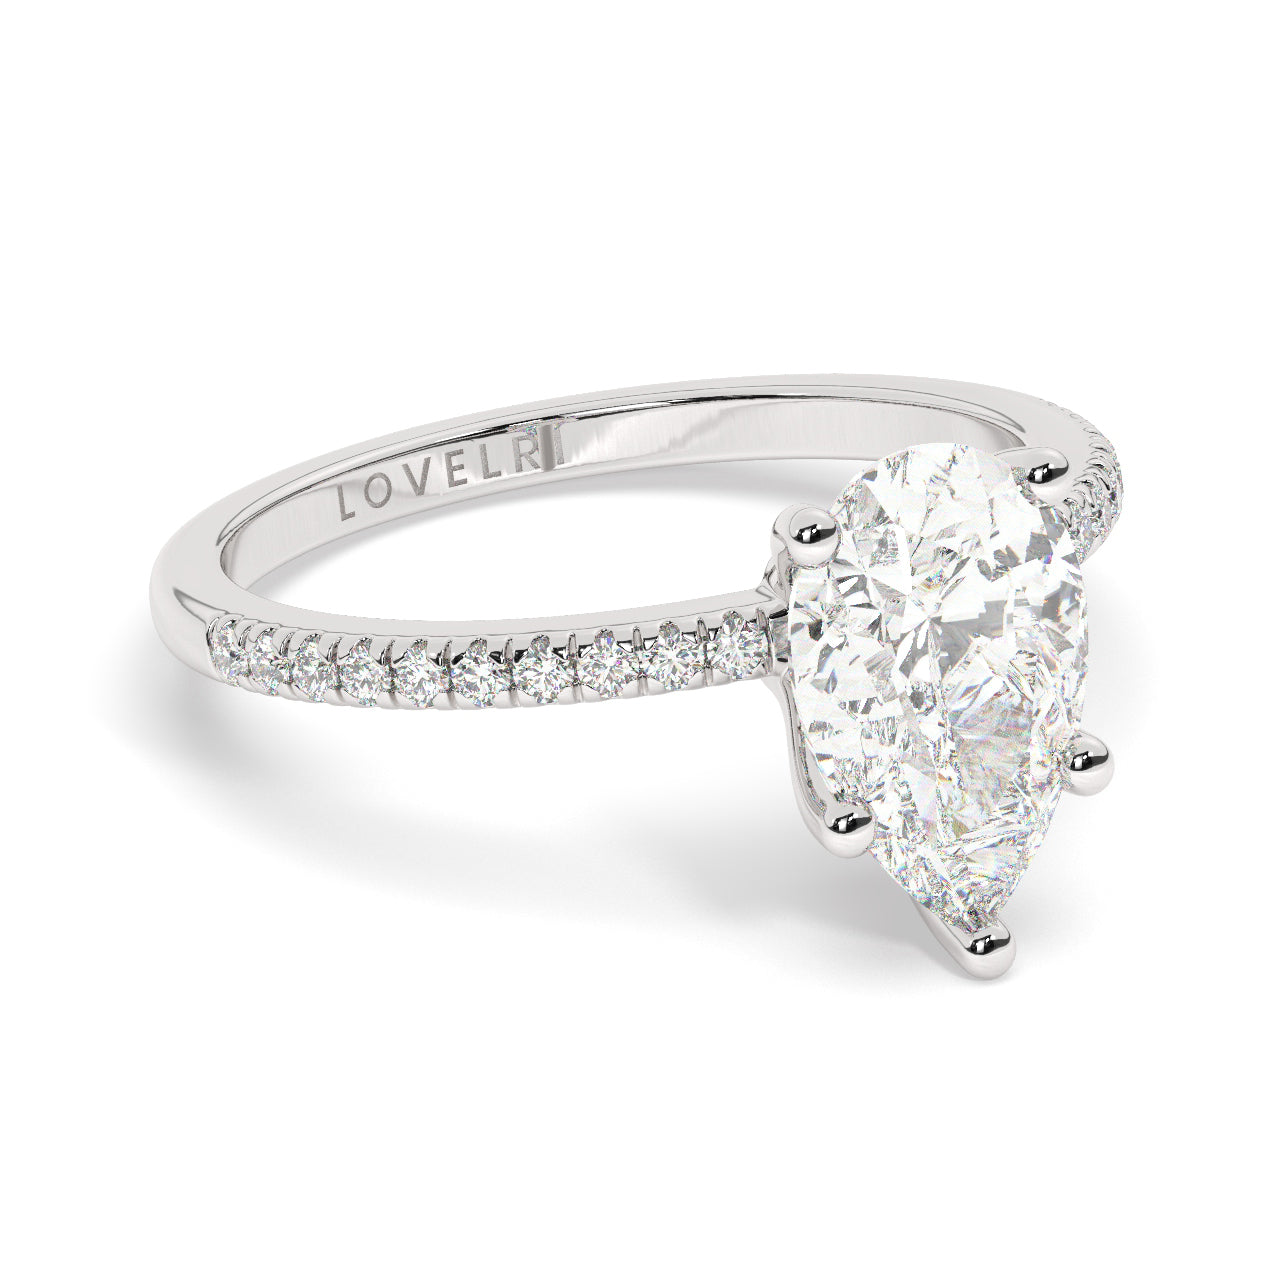 Pear Cut Lab Diamond Ring with a Pave Band on a Platinum Setting - Rotated View